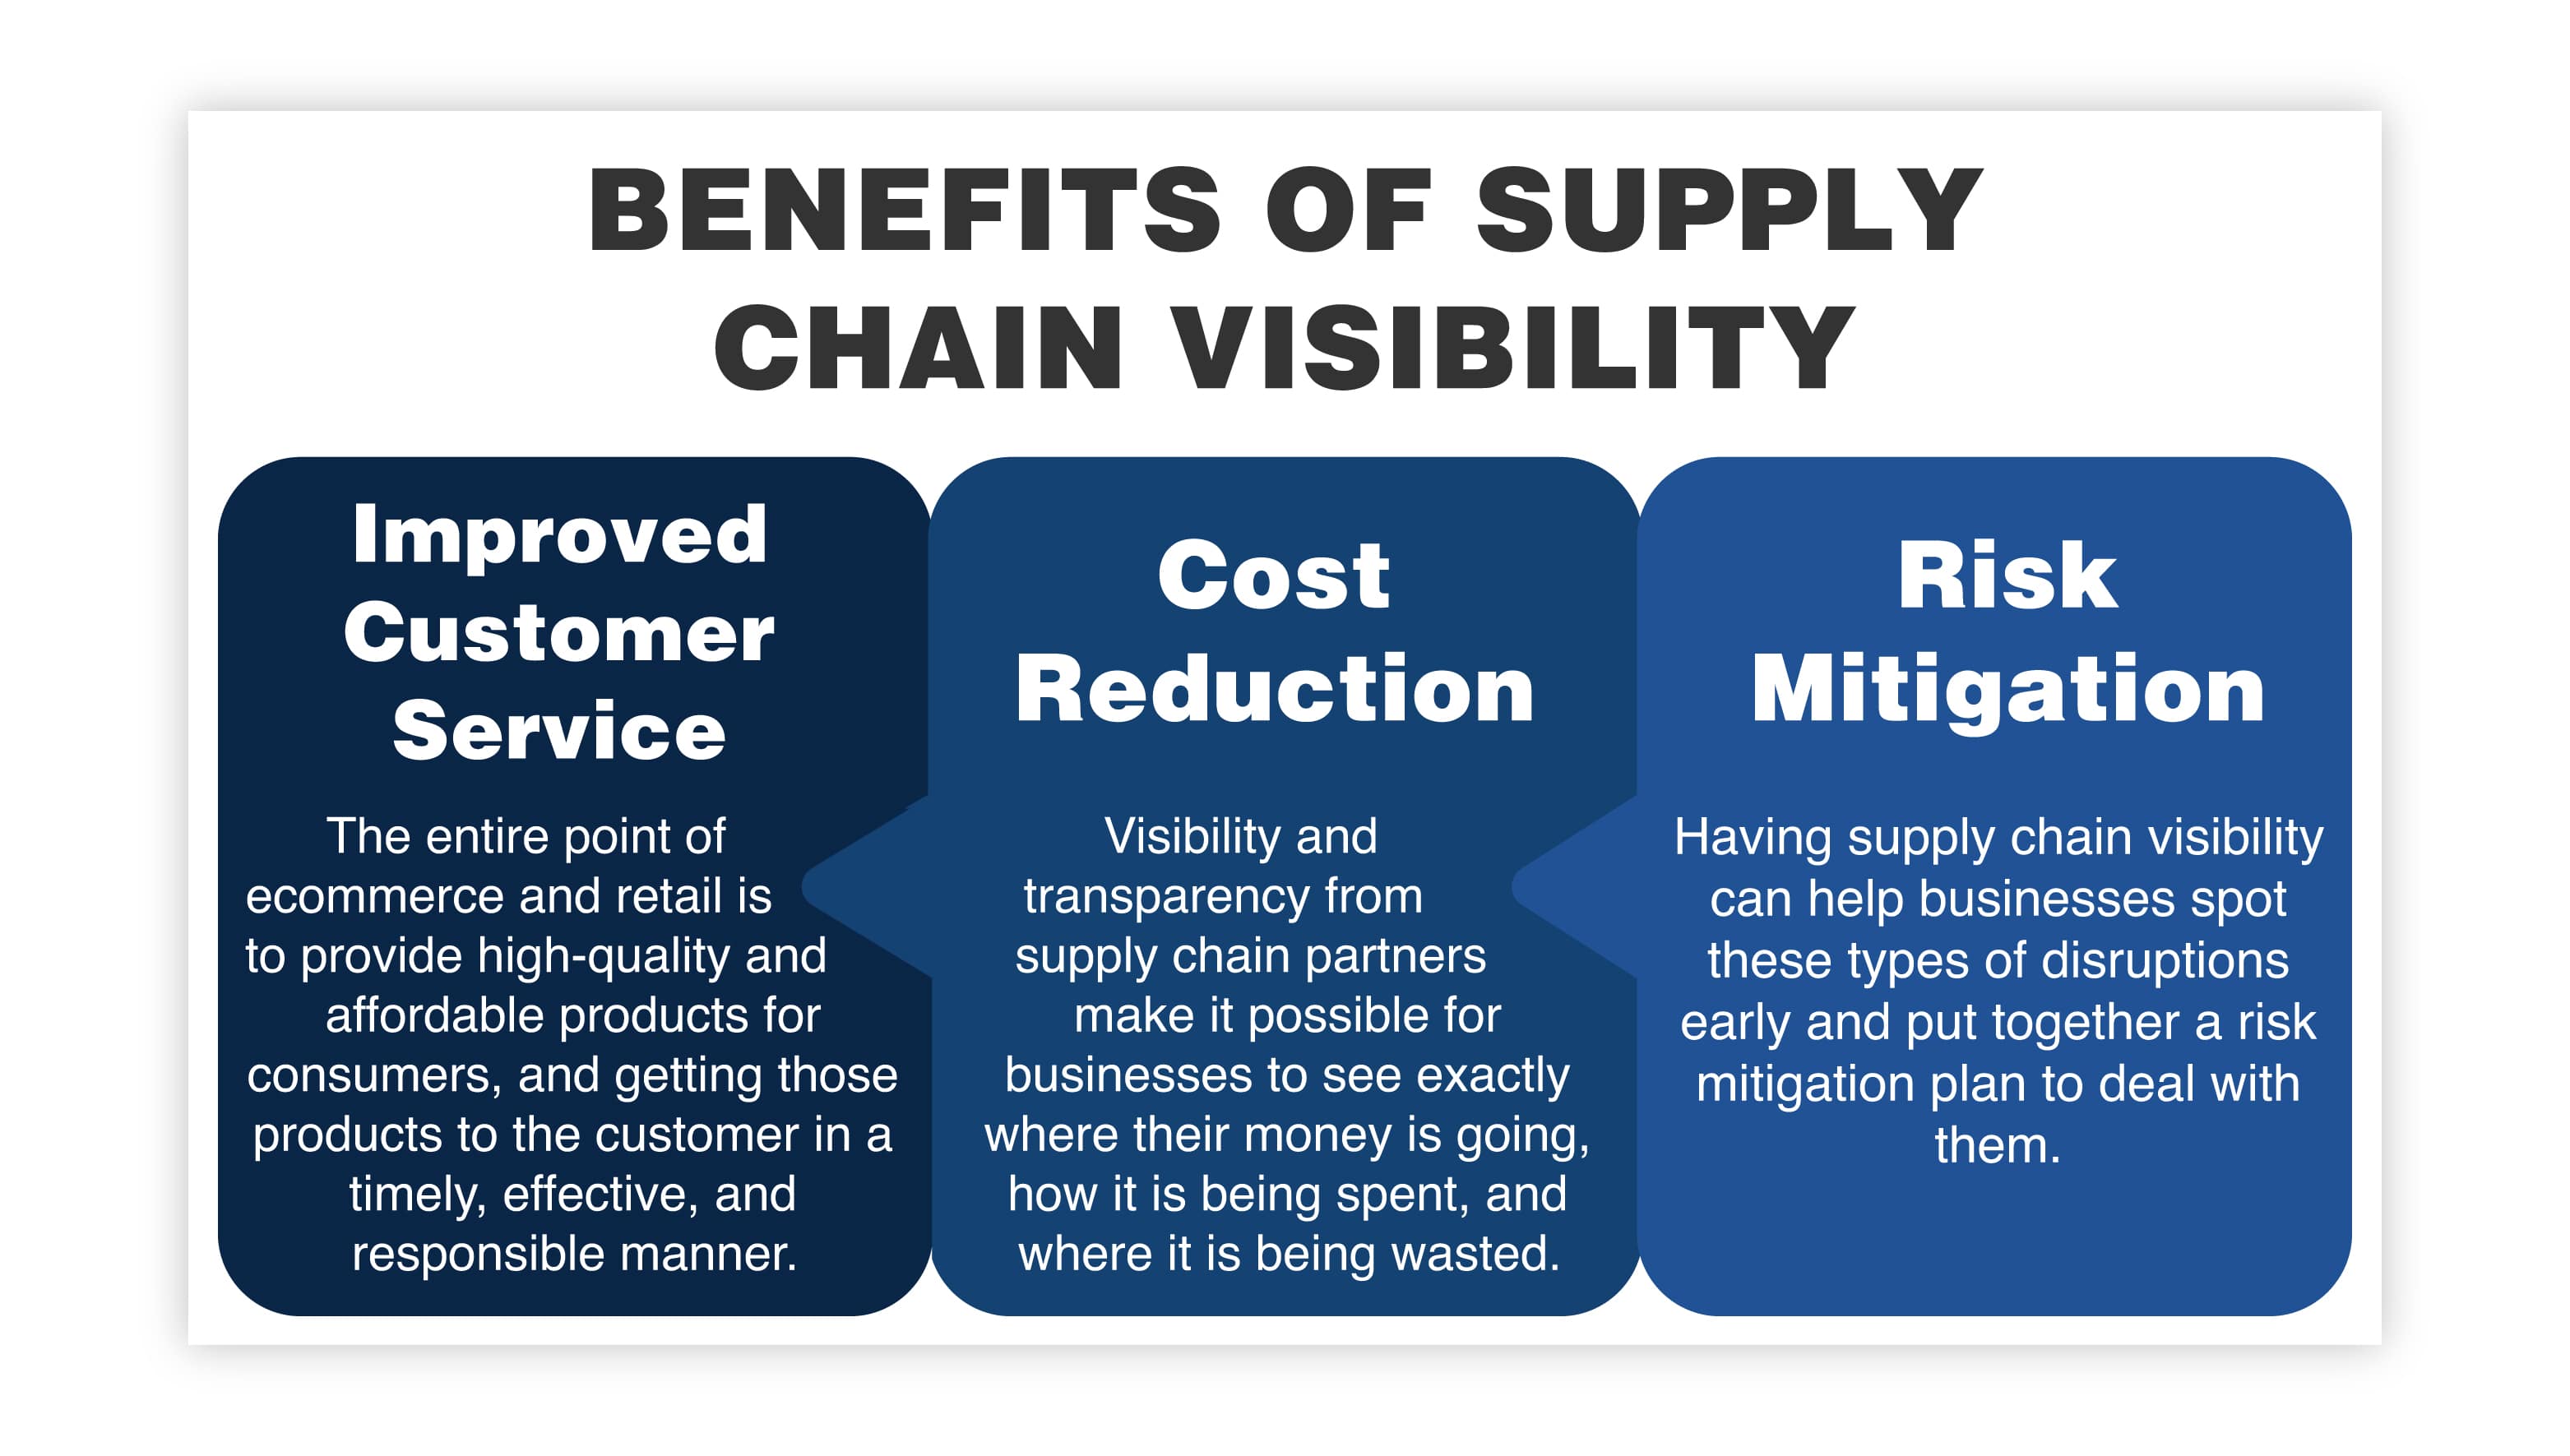 BENEFITS OF SUPPLY CHAIN VISIBILITY